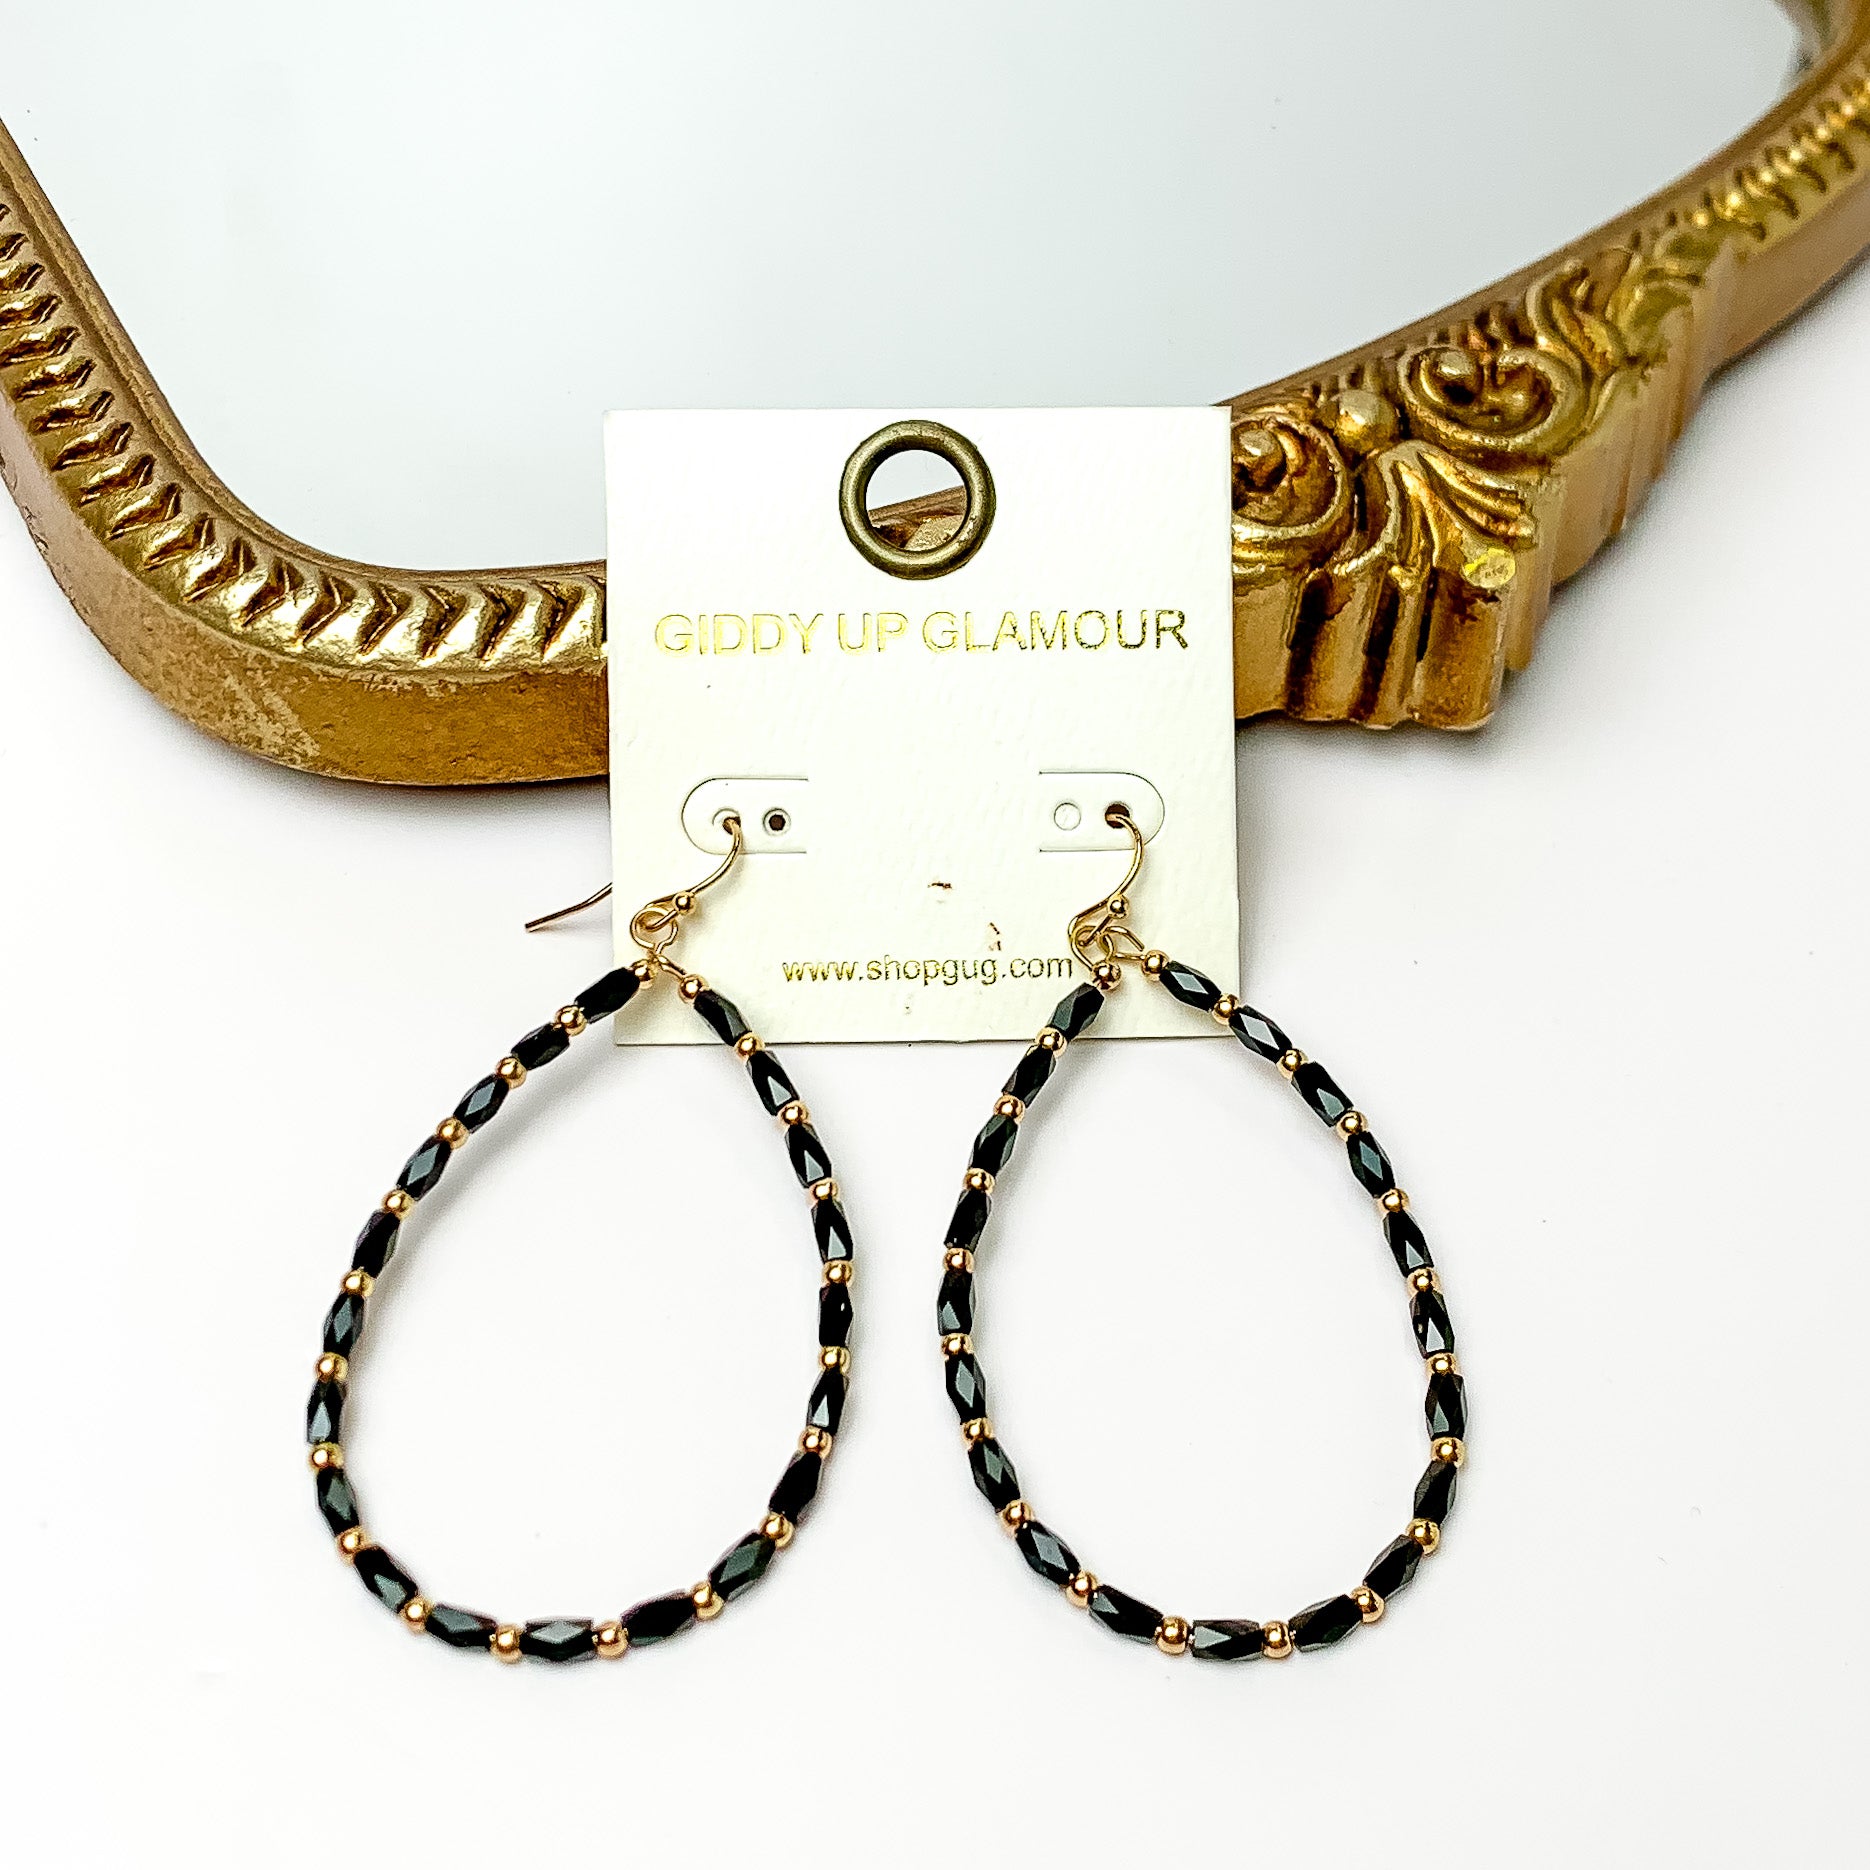 Black beaded open drop earrings with gold tone features. Pictured on a white background with a gold frame through it.